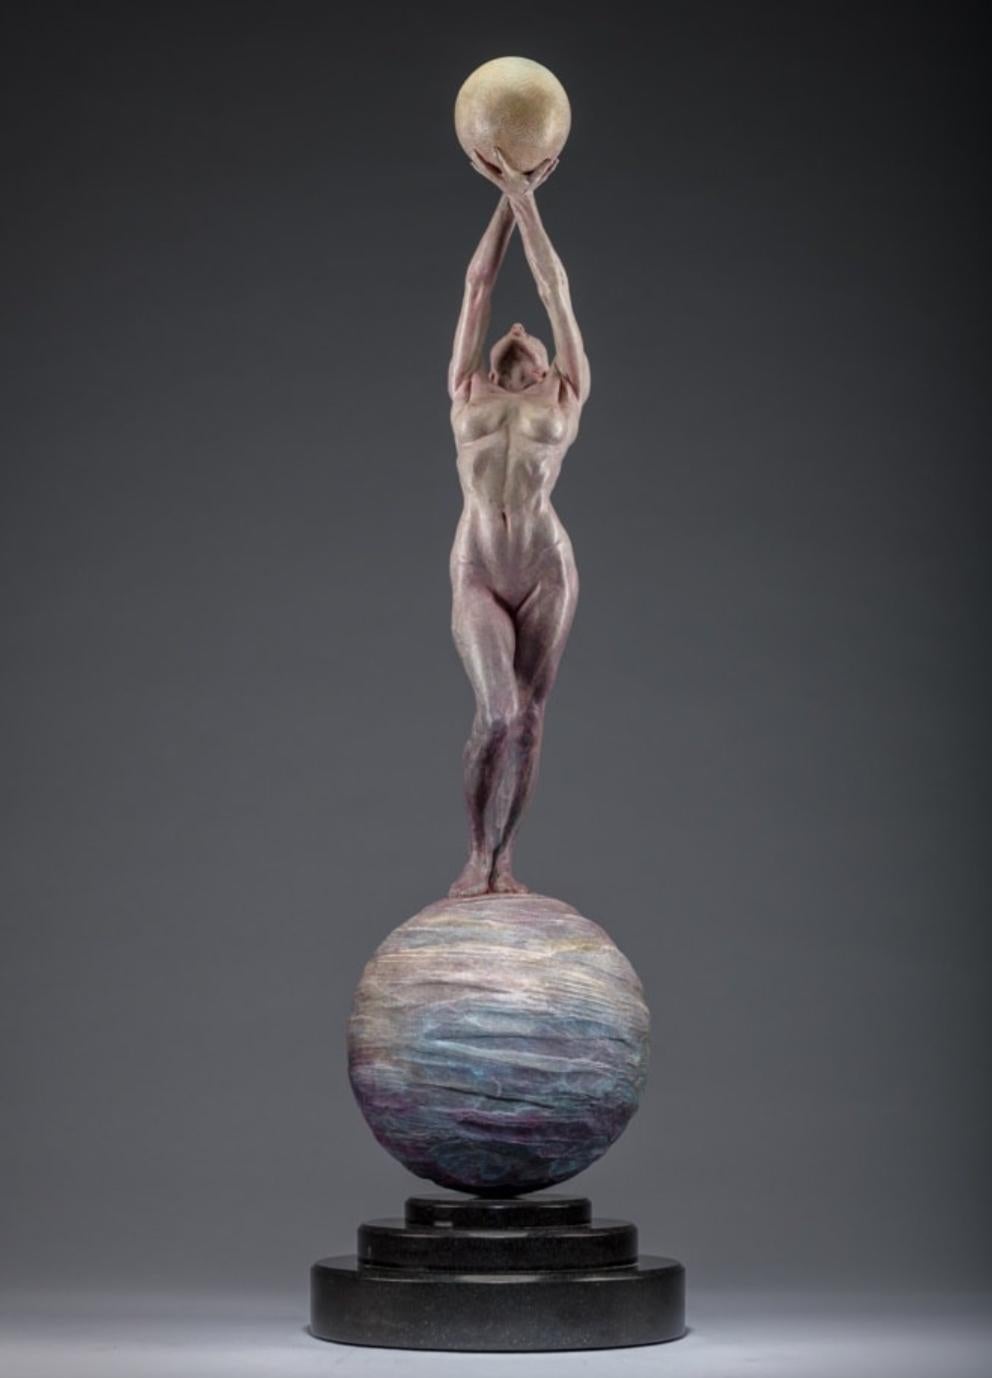 Richard MacDonald was inspired by the goddess of Ancient Greek mythology, Diana, a huntress who combines feminine grace with confidence and wisdom.  As a modern symbol of femininity, Diana Earth & Moon stands on a sphere representing the earth as